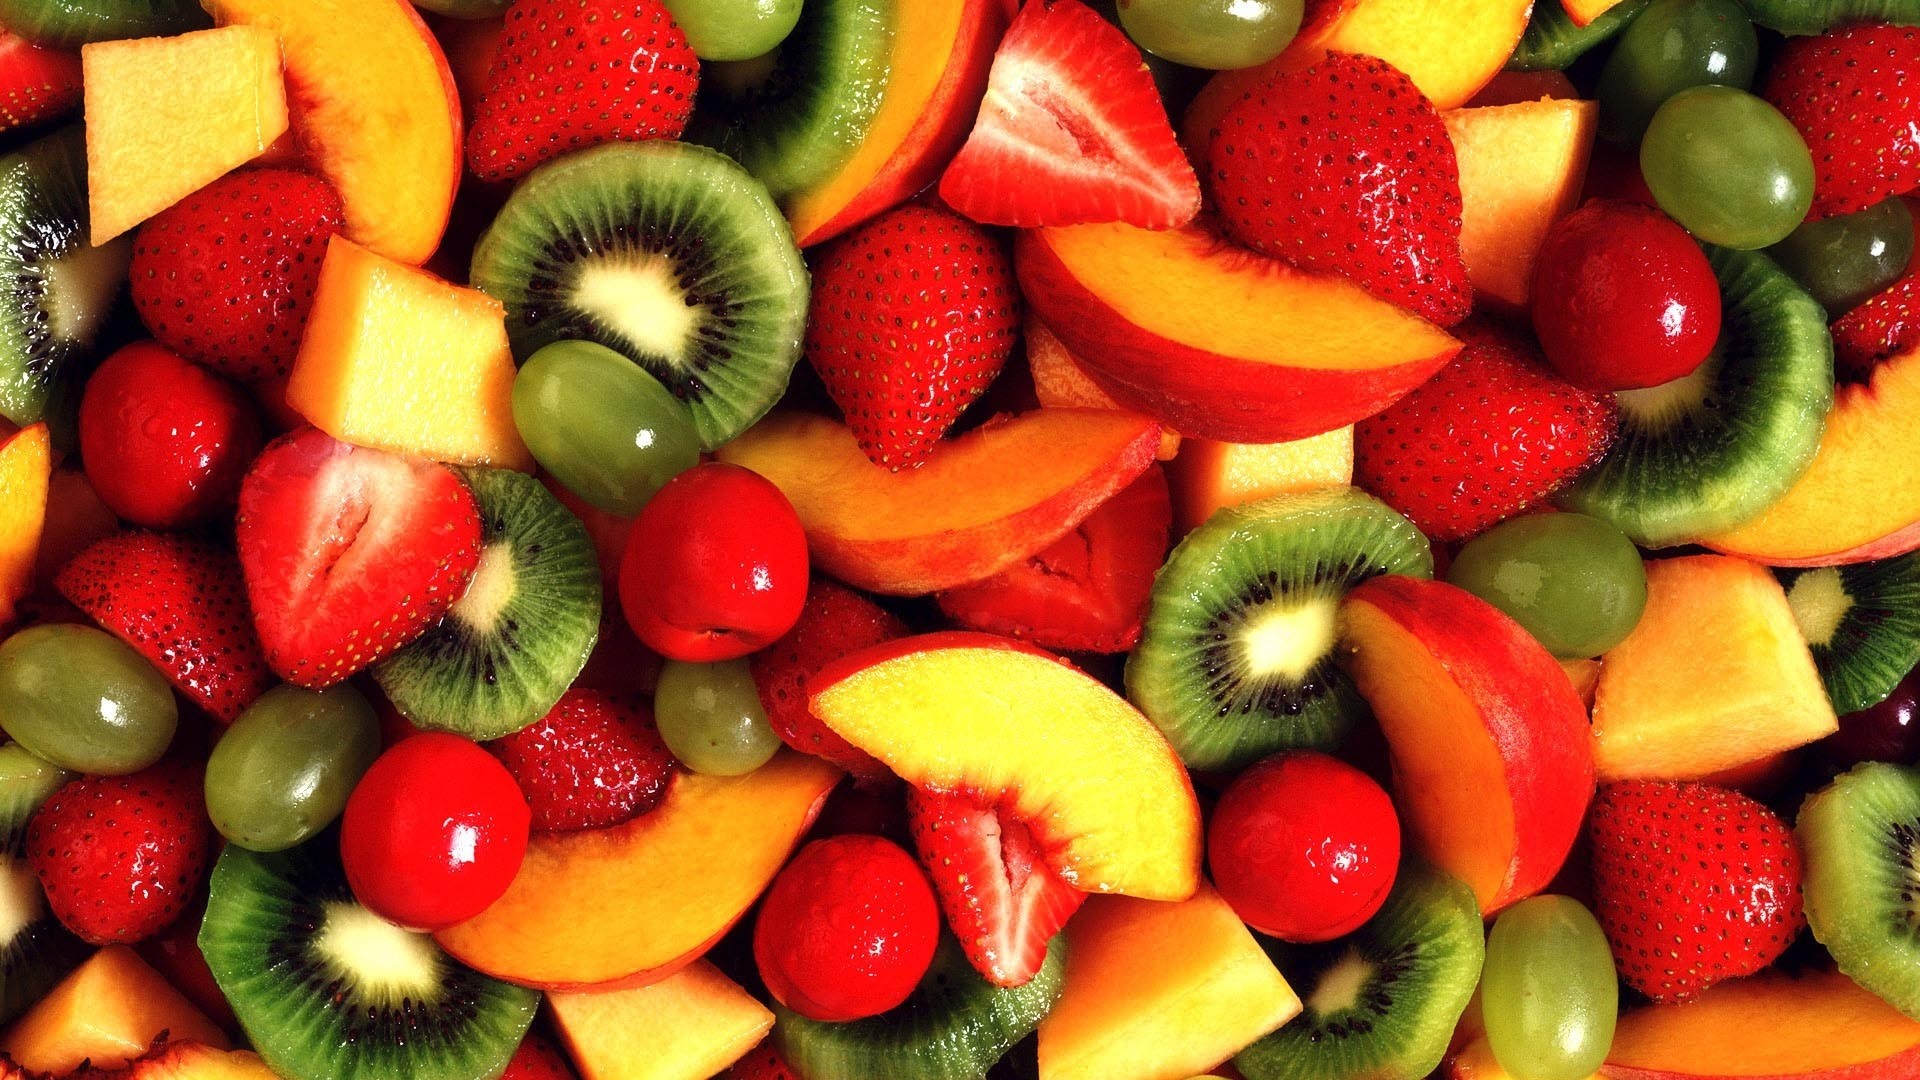 fruit hd wallpaper background image 2560x1600 on fruits wallpapers